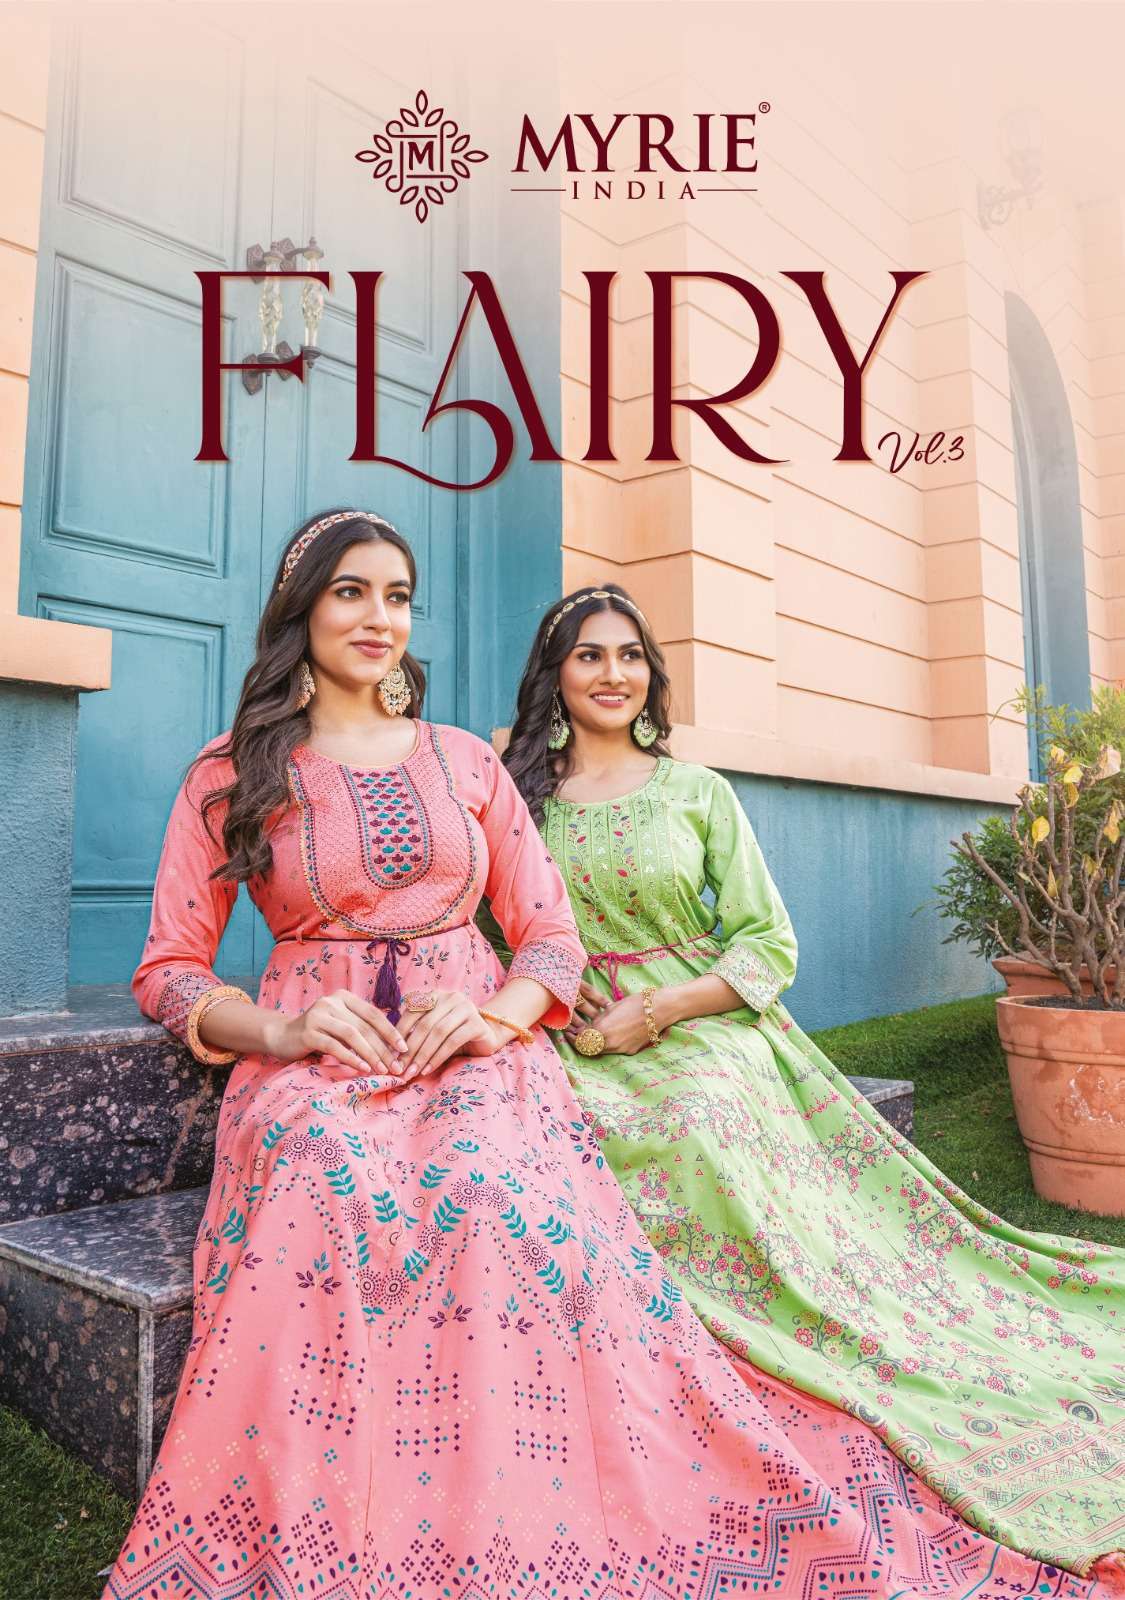 mayree india flairy vol 3 series 301-308 Heavy Reyon Printed Gown 